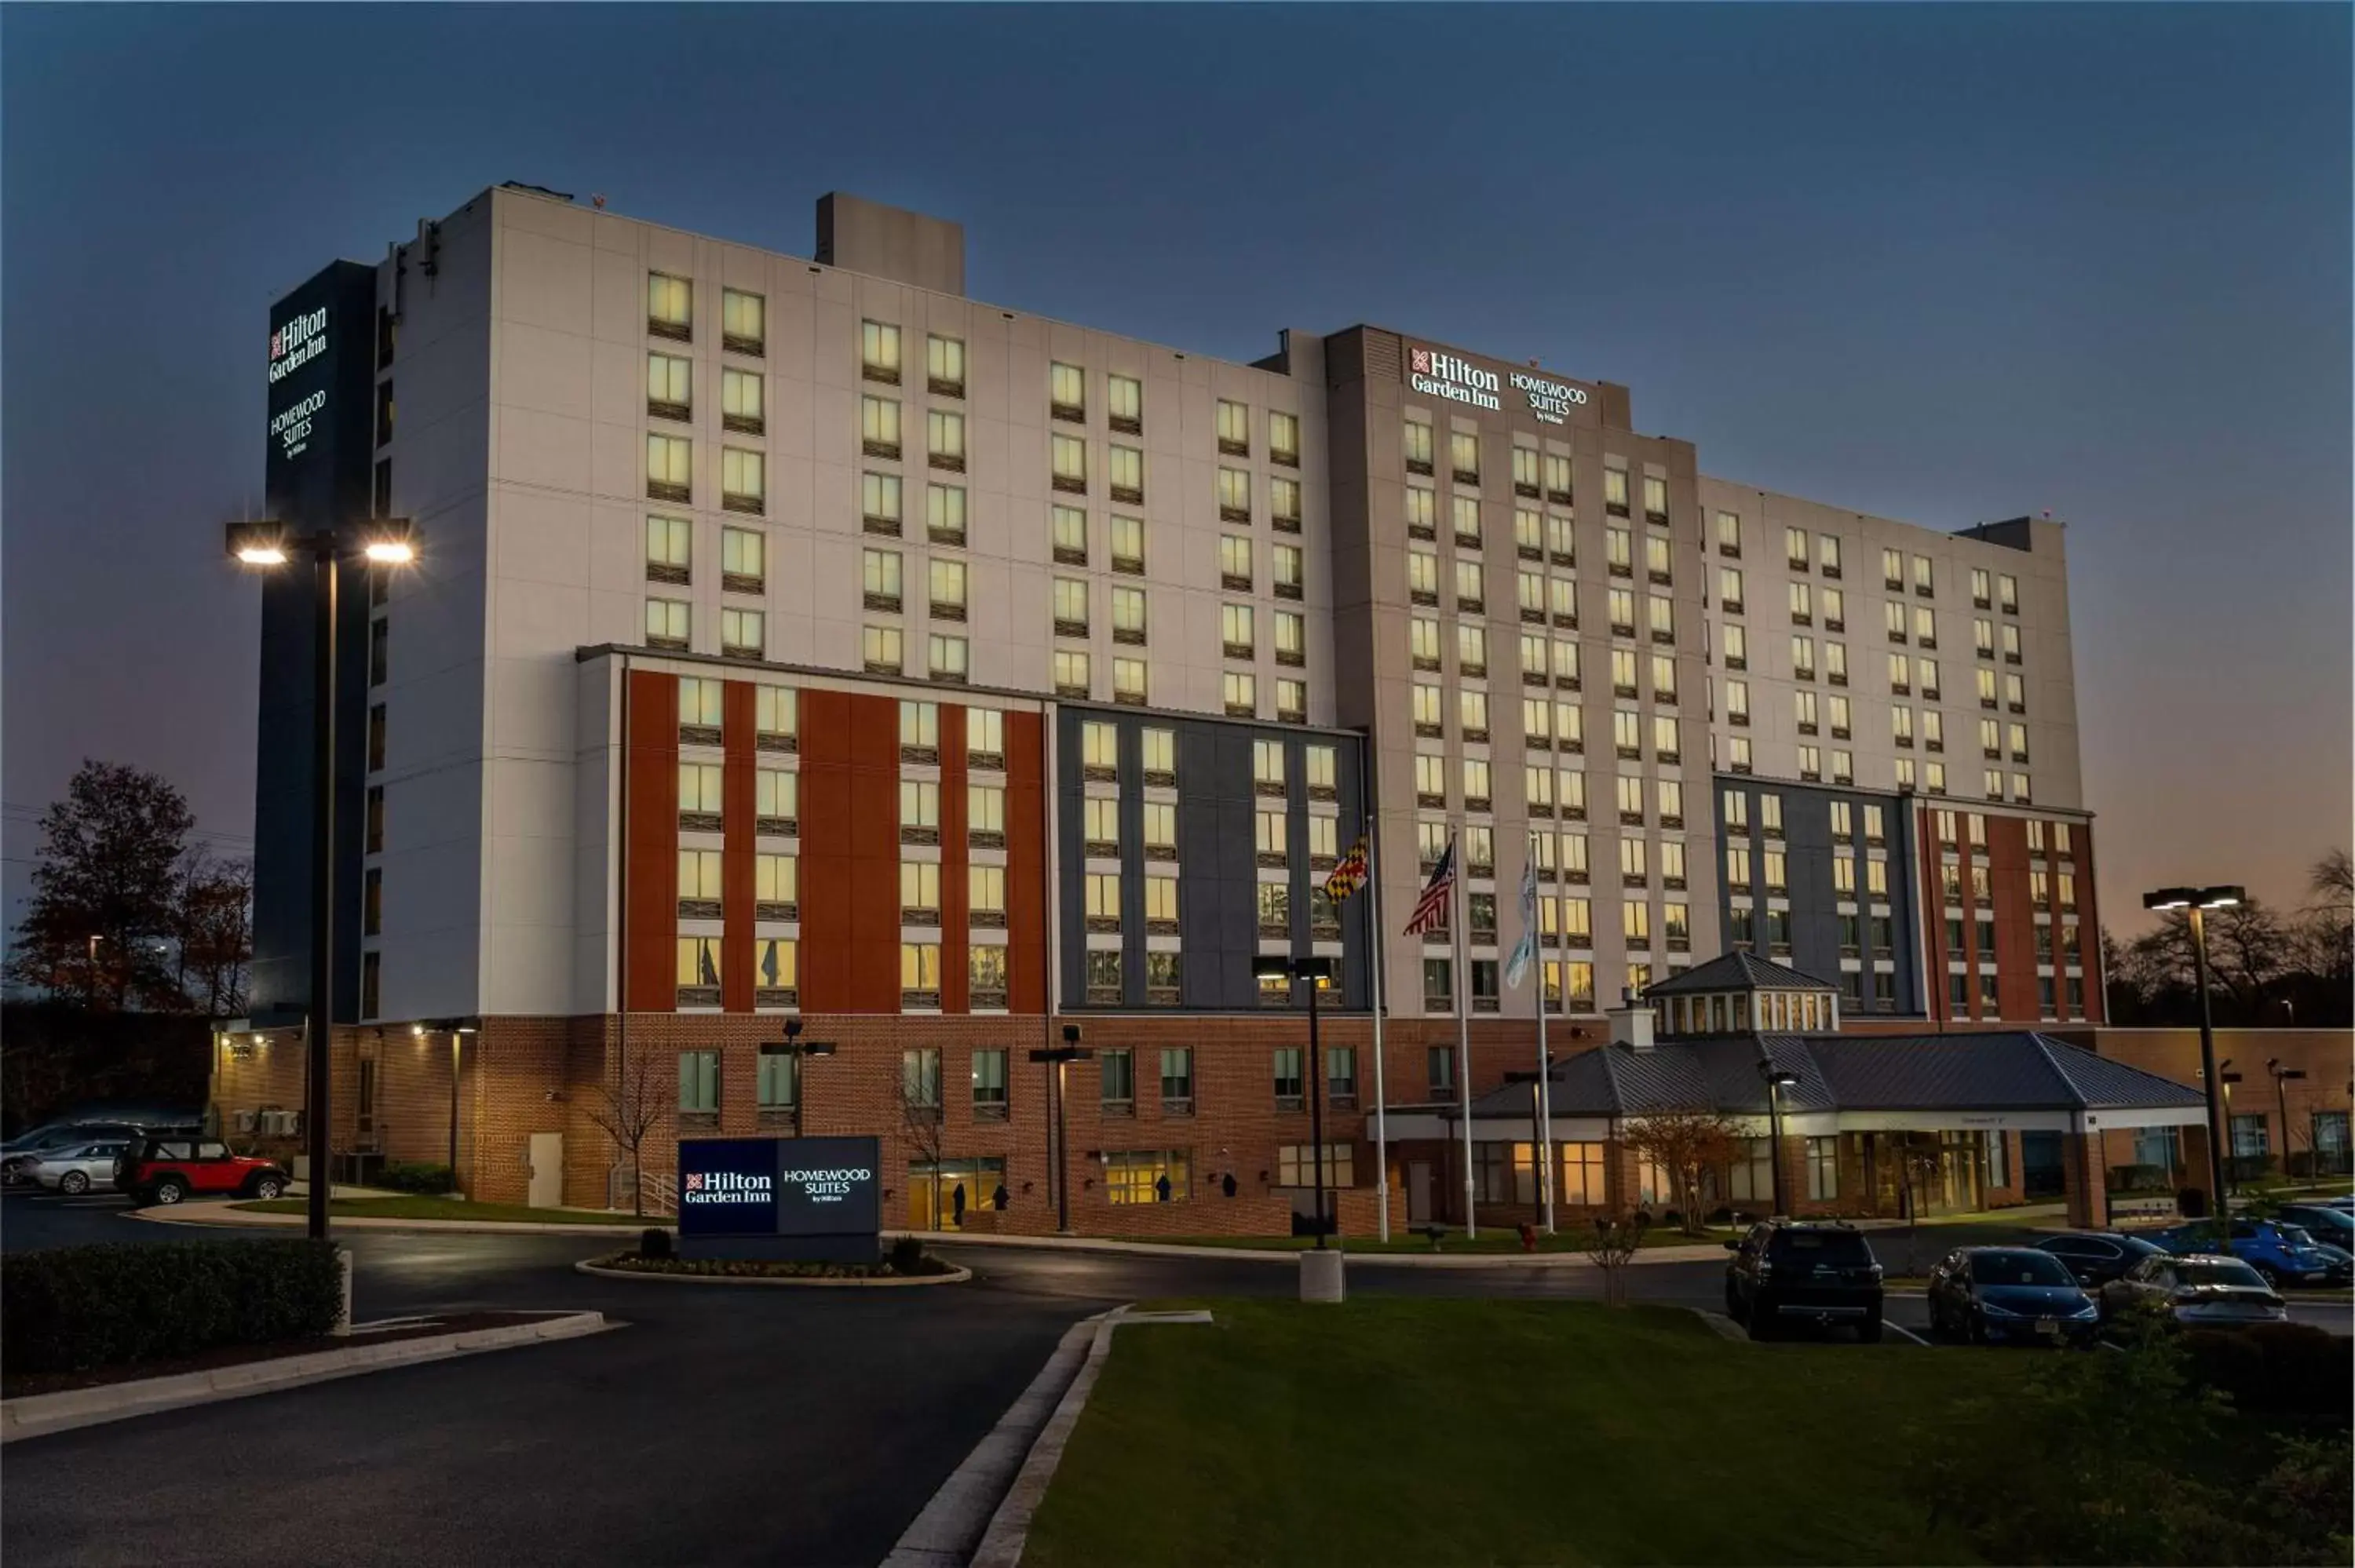 Property Building in Homewood Suites by Hilton Baltimore - Arundel Mills